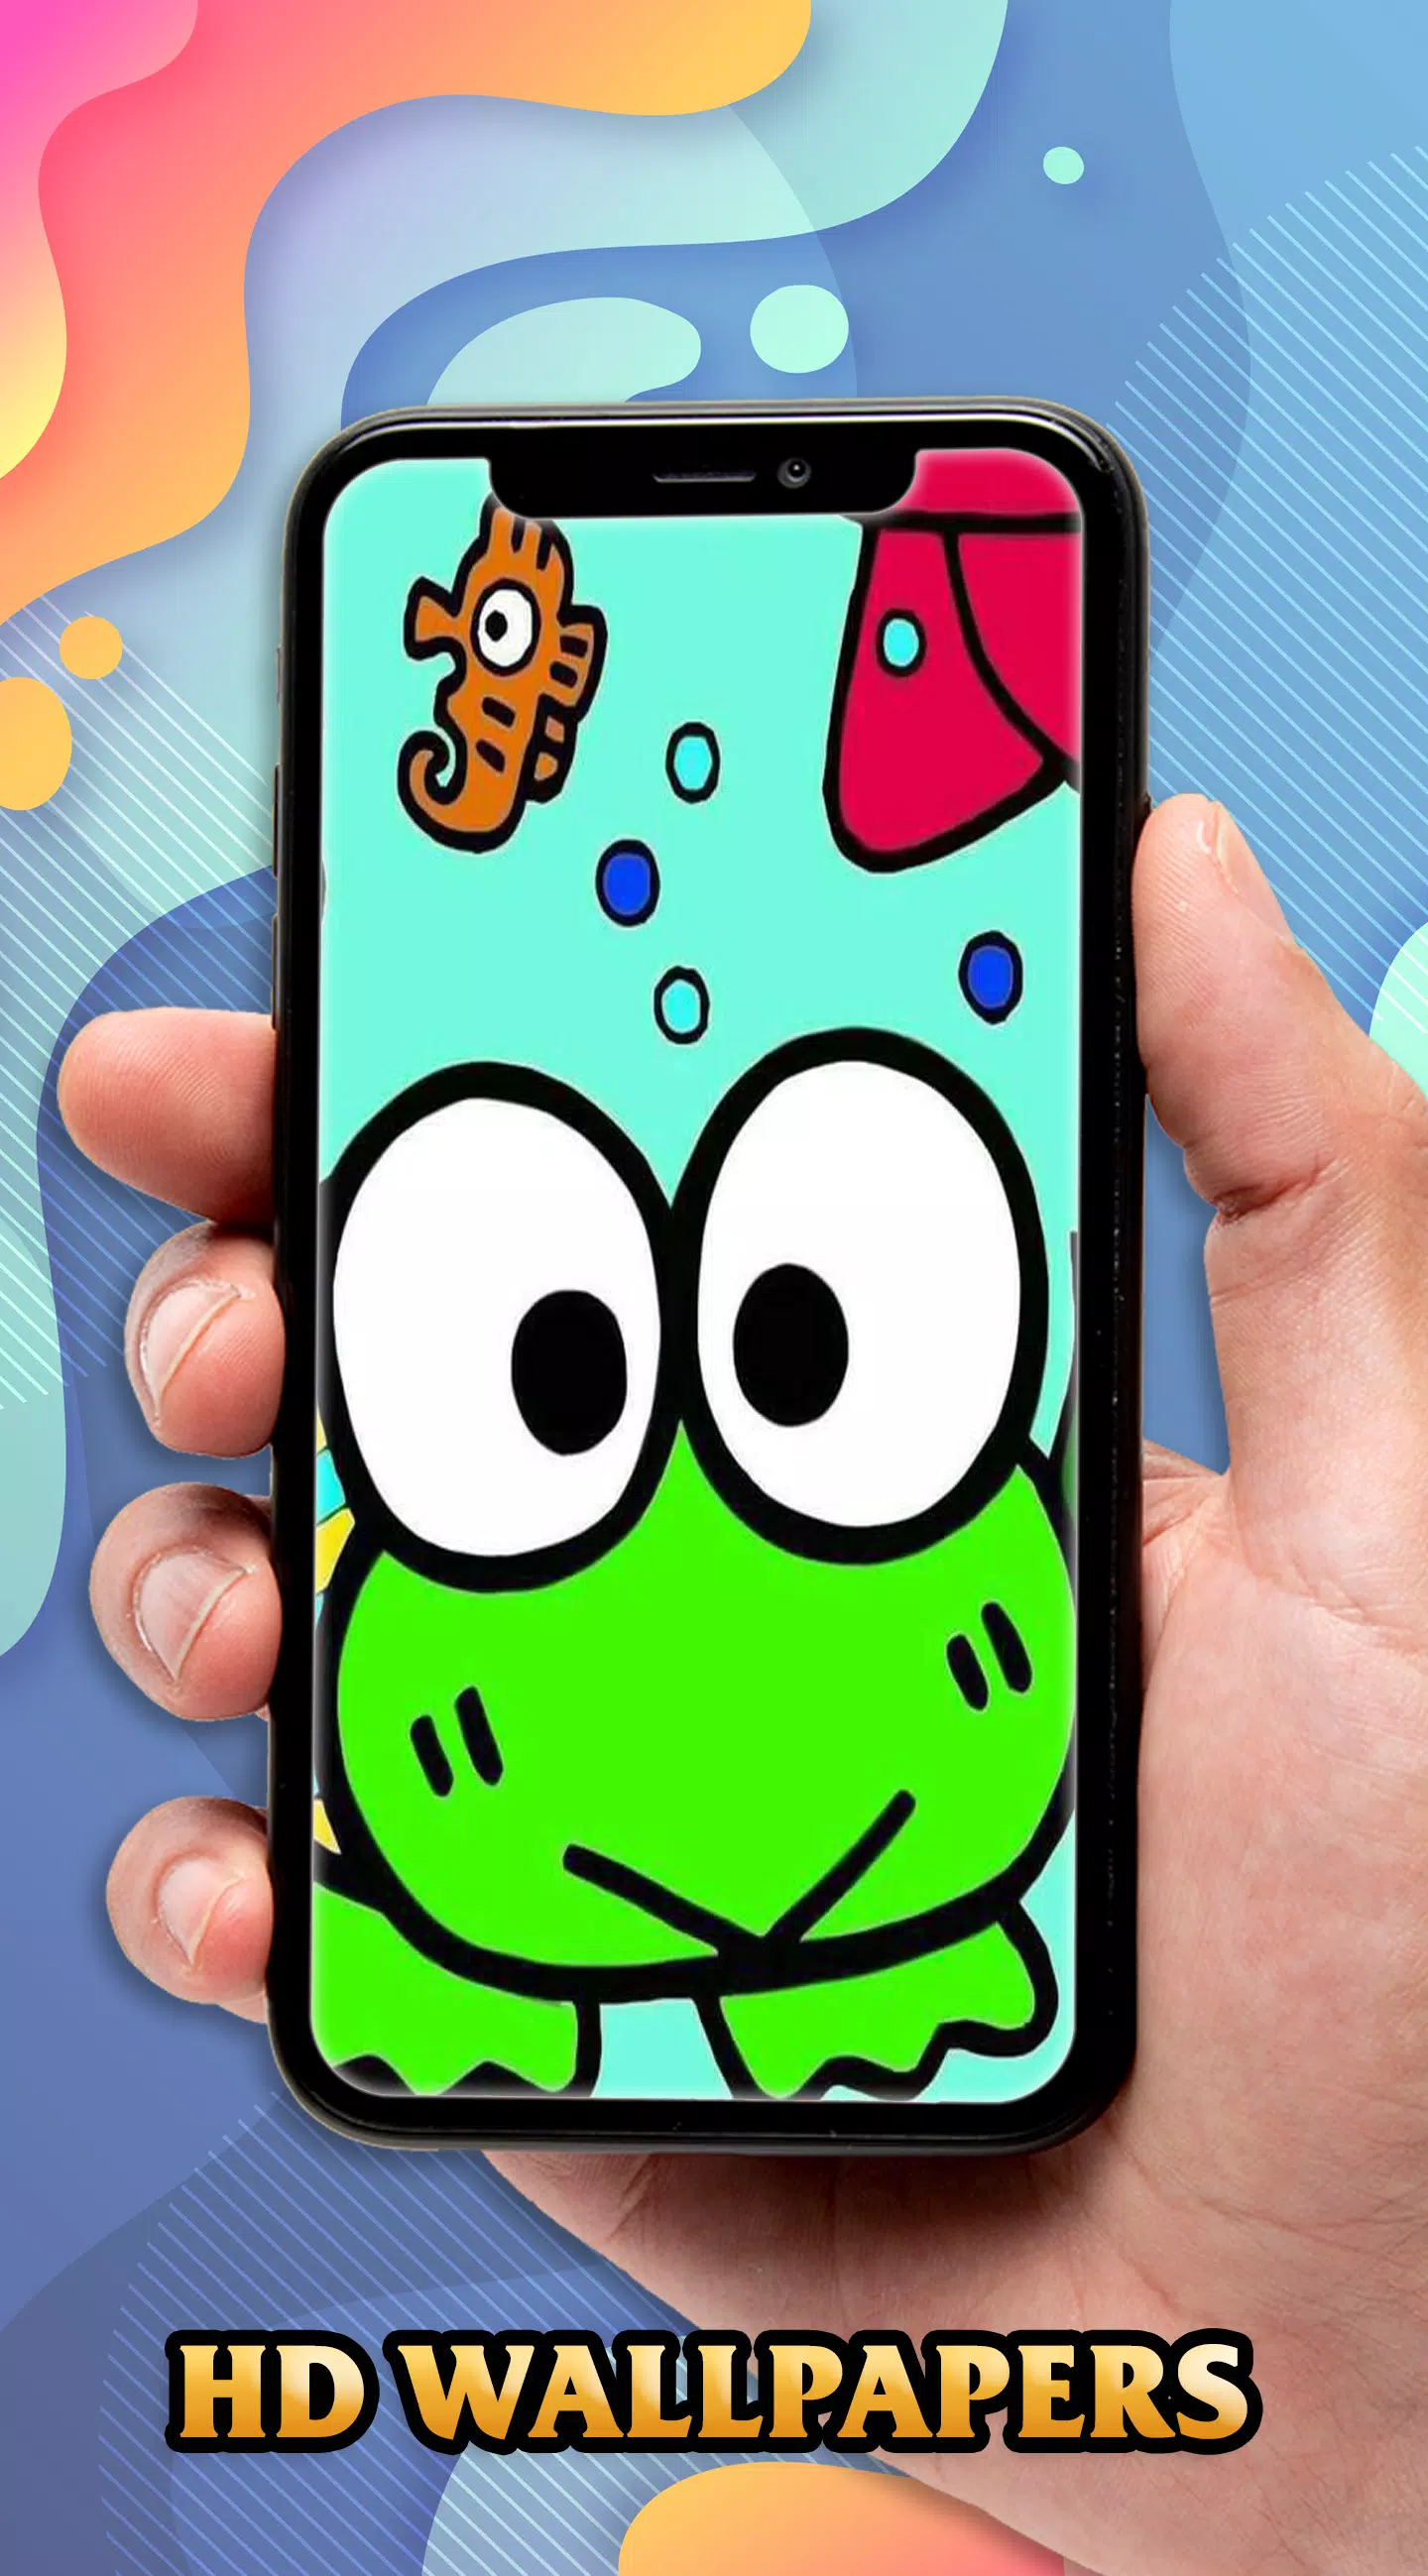 Cute keroppi wallpaper apk for android download